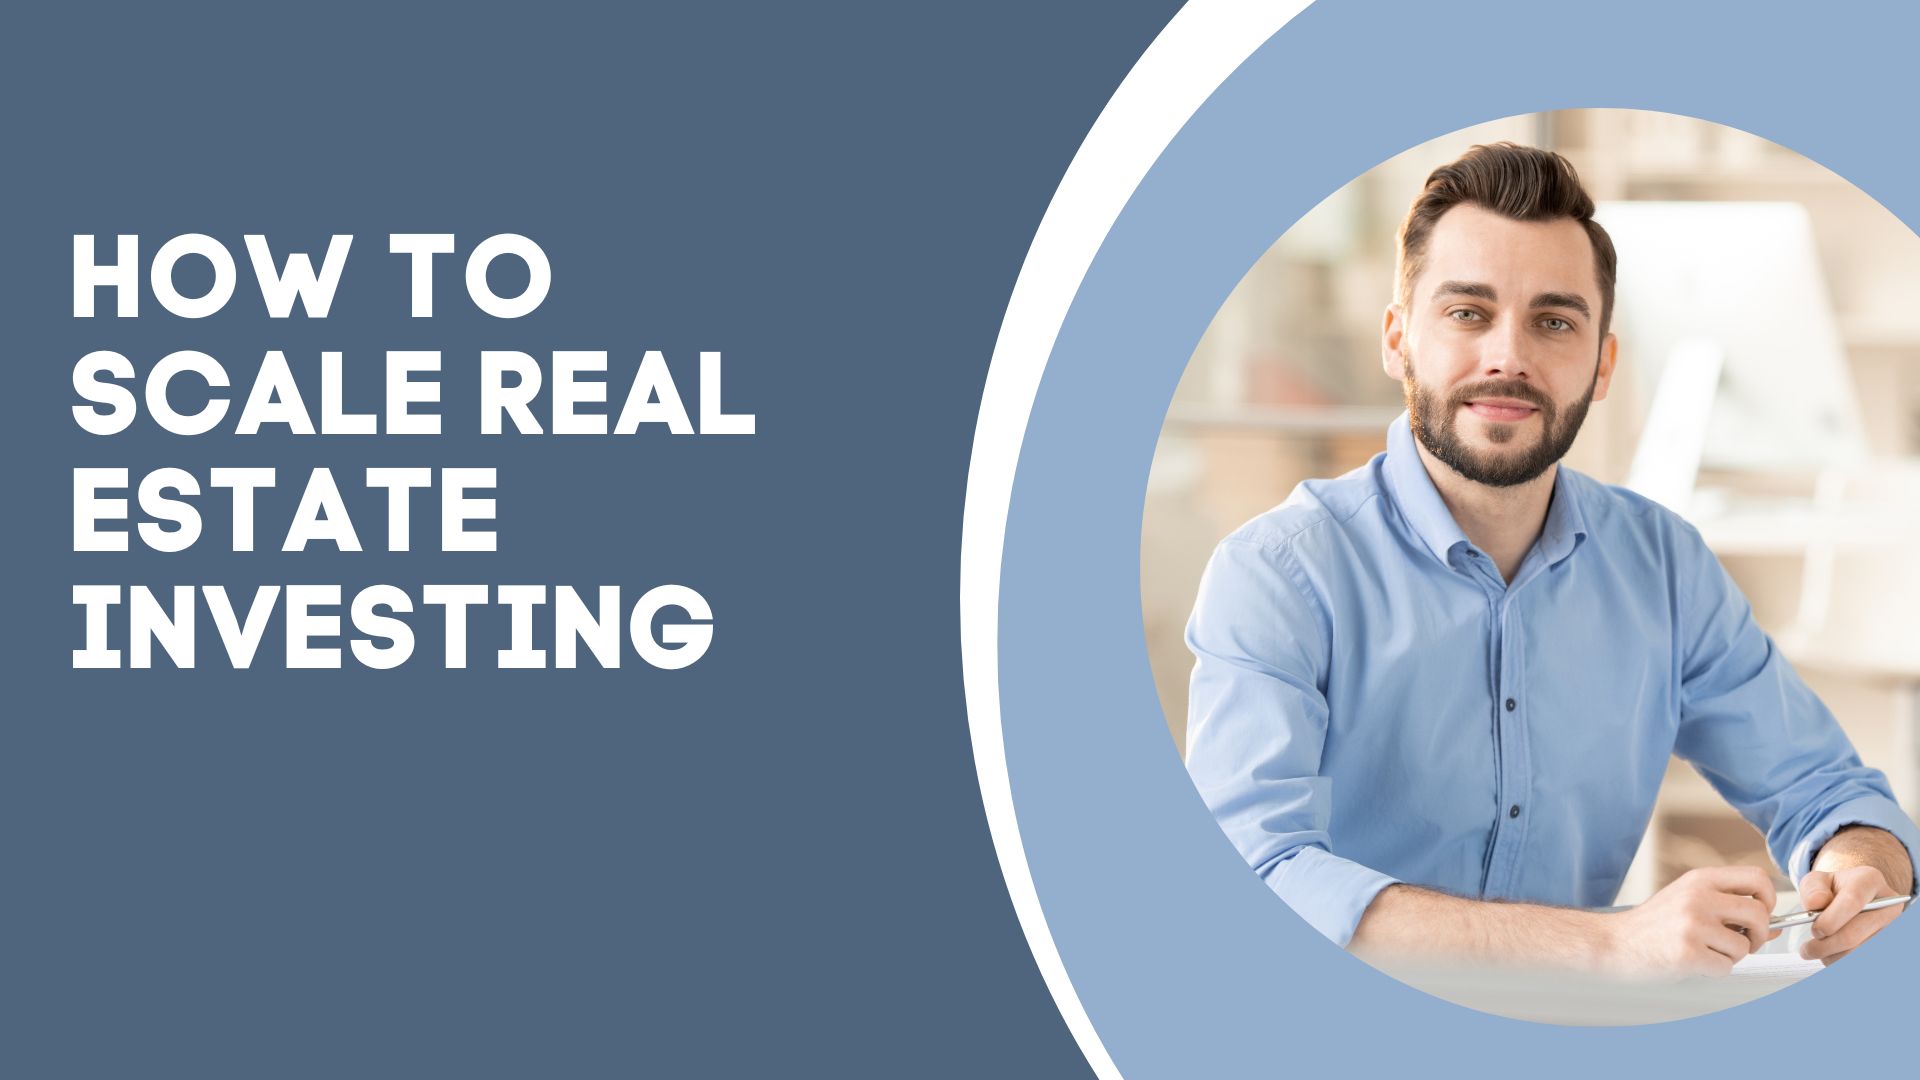 How to Scale Real Estate Investing